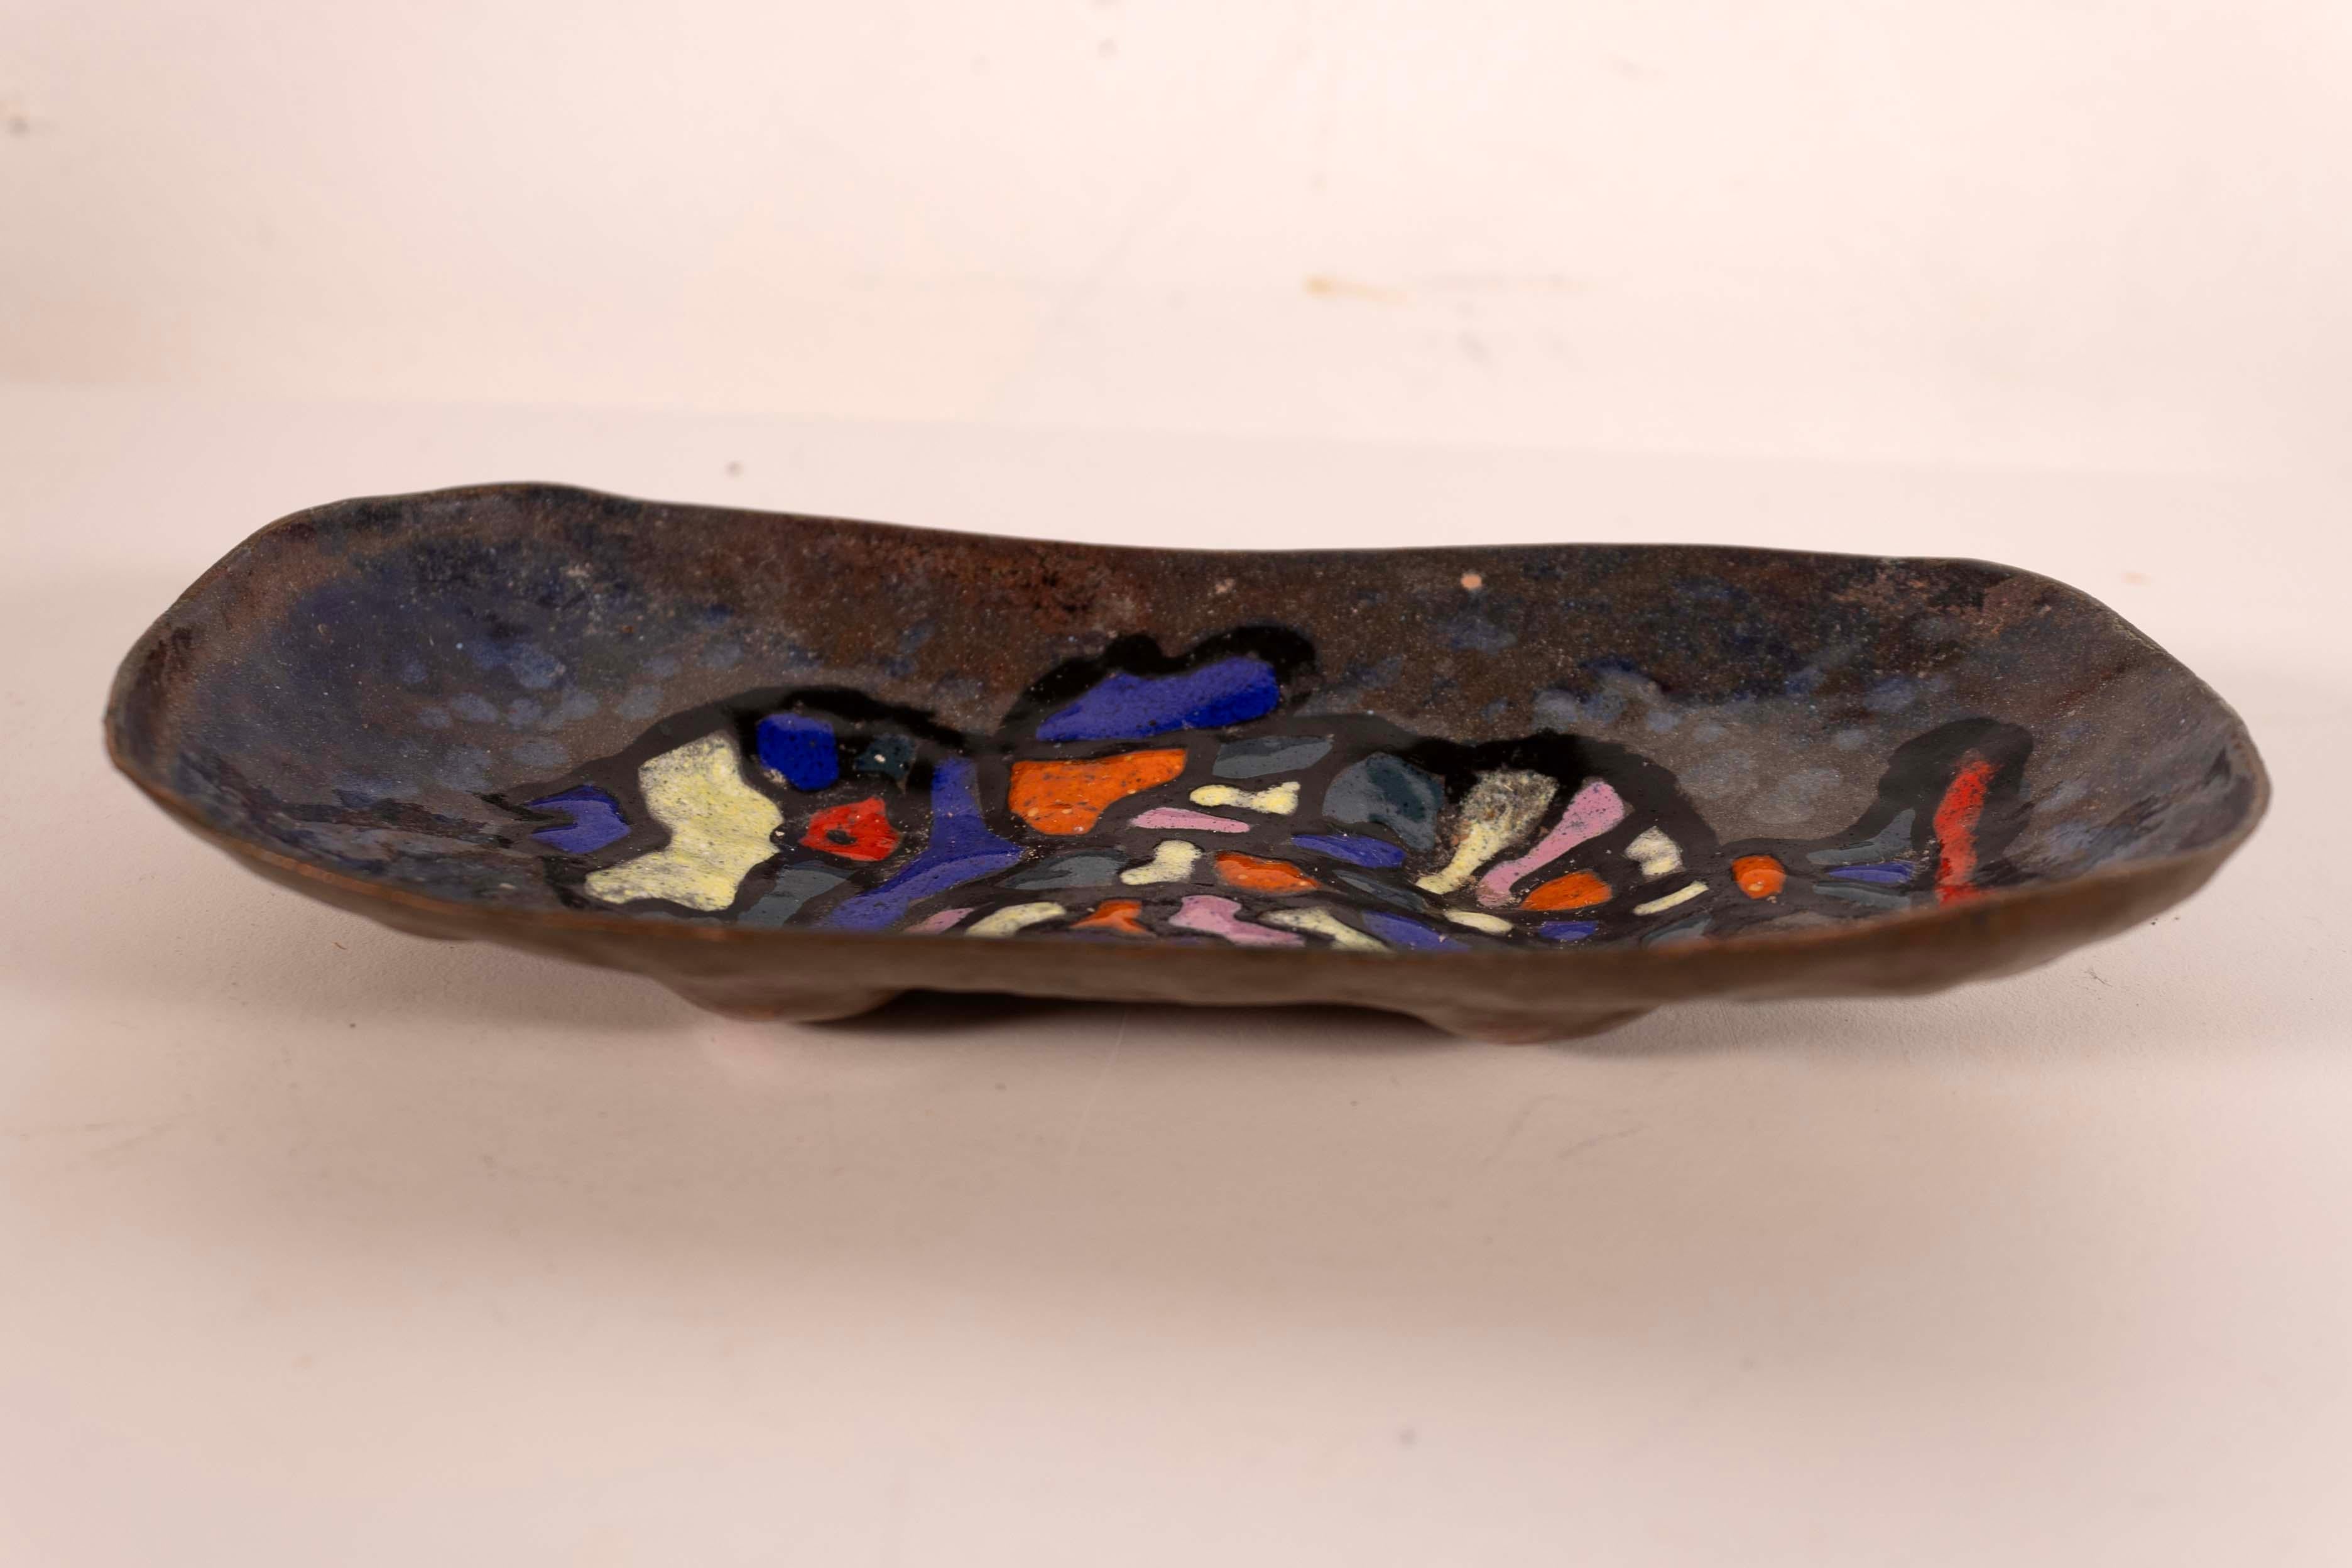 Severa Made in Italy Enameled Modern Ceramic Fish Design Elongated Plate In Good Condition For Sale In Keego Harbor, MI